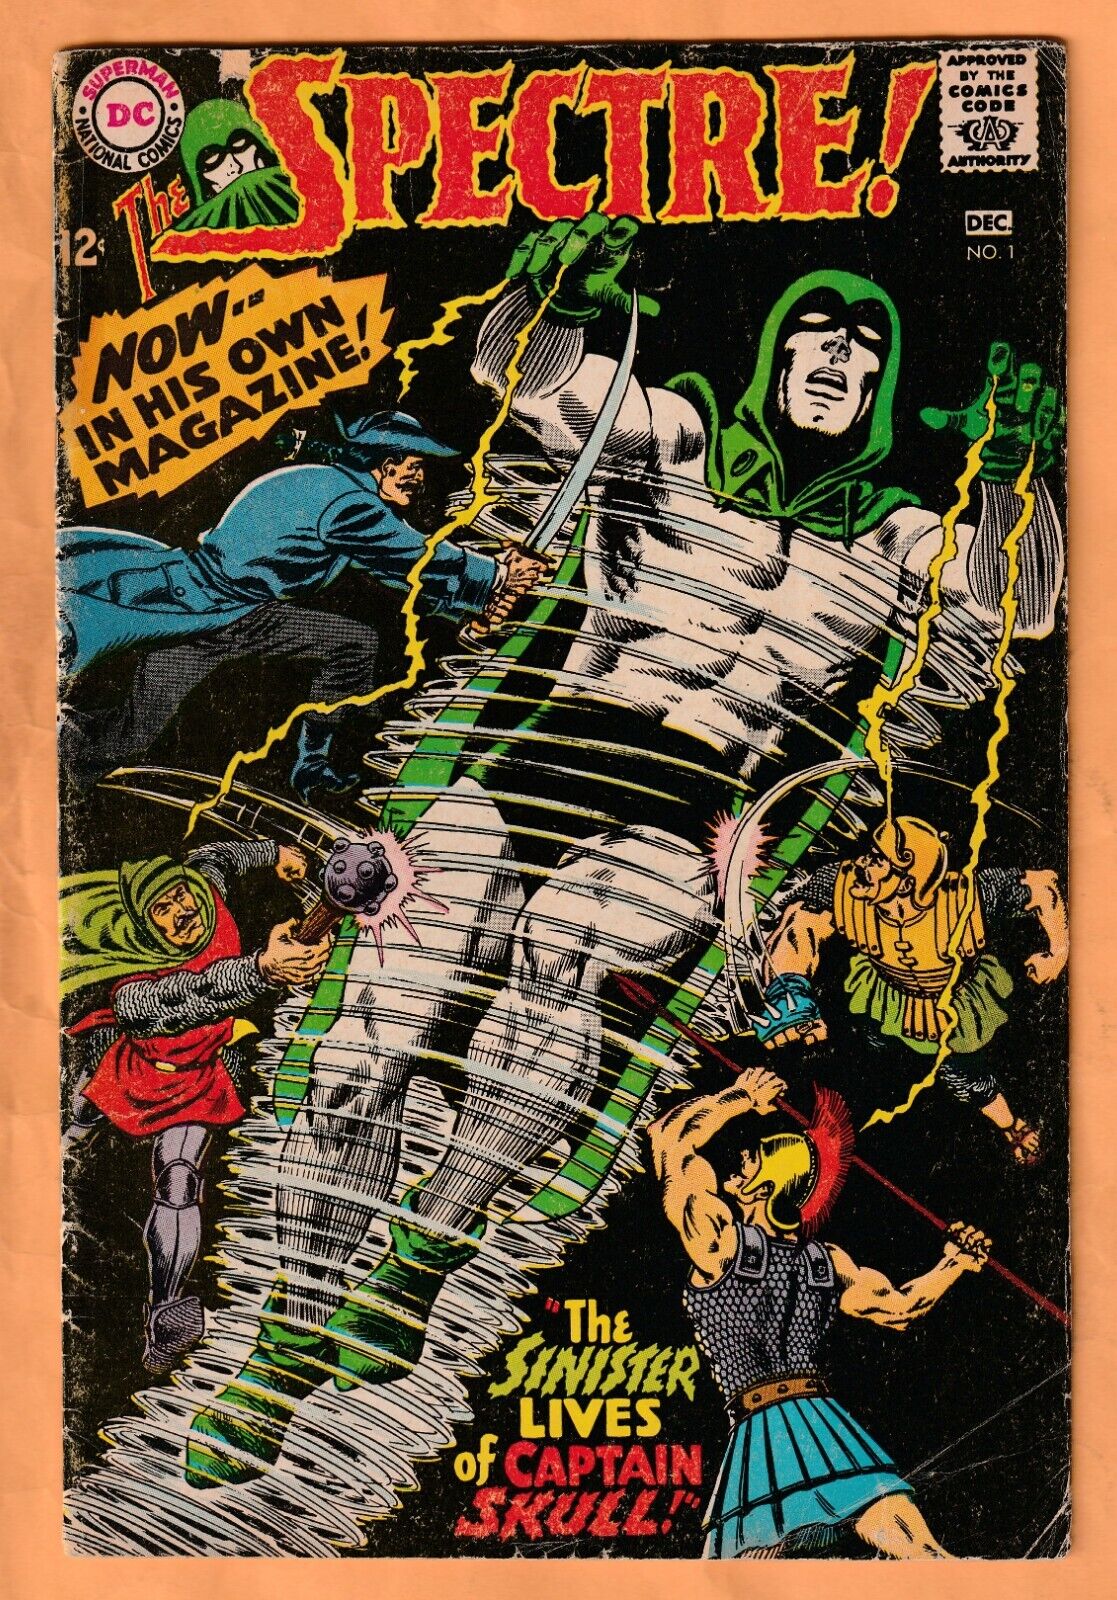 DC THE SPECTRE No. 1 (1967) Sinister Lives of Captain Skull